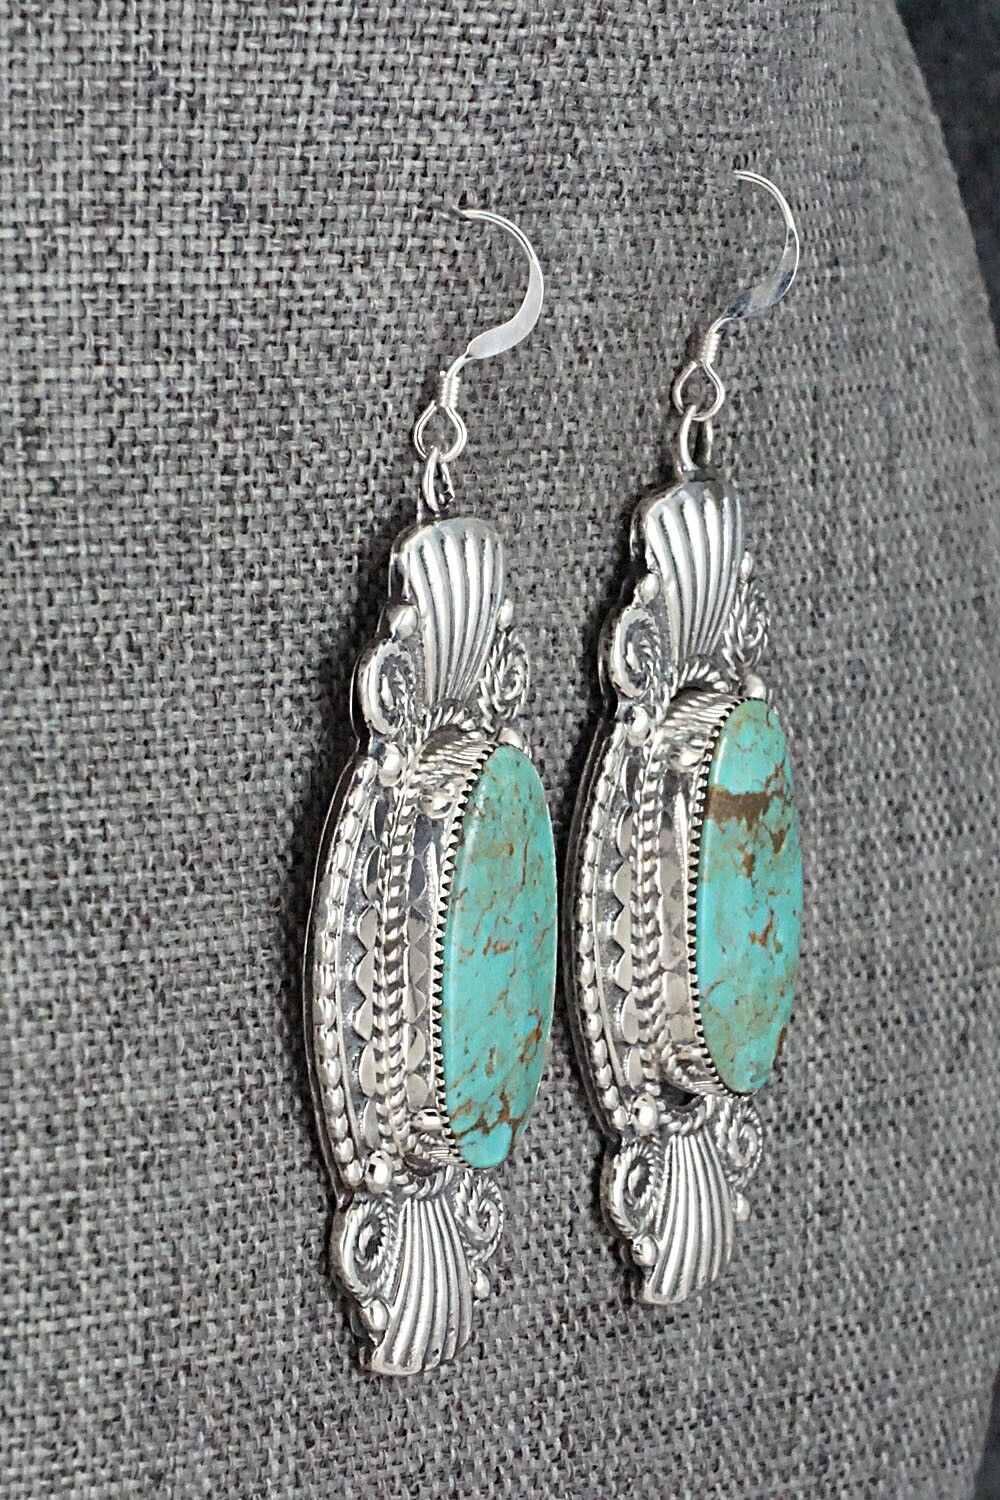 Turquoise and Sterling Silver Earrings - Irvin Tsosie